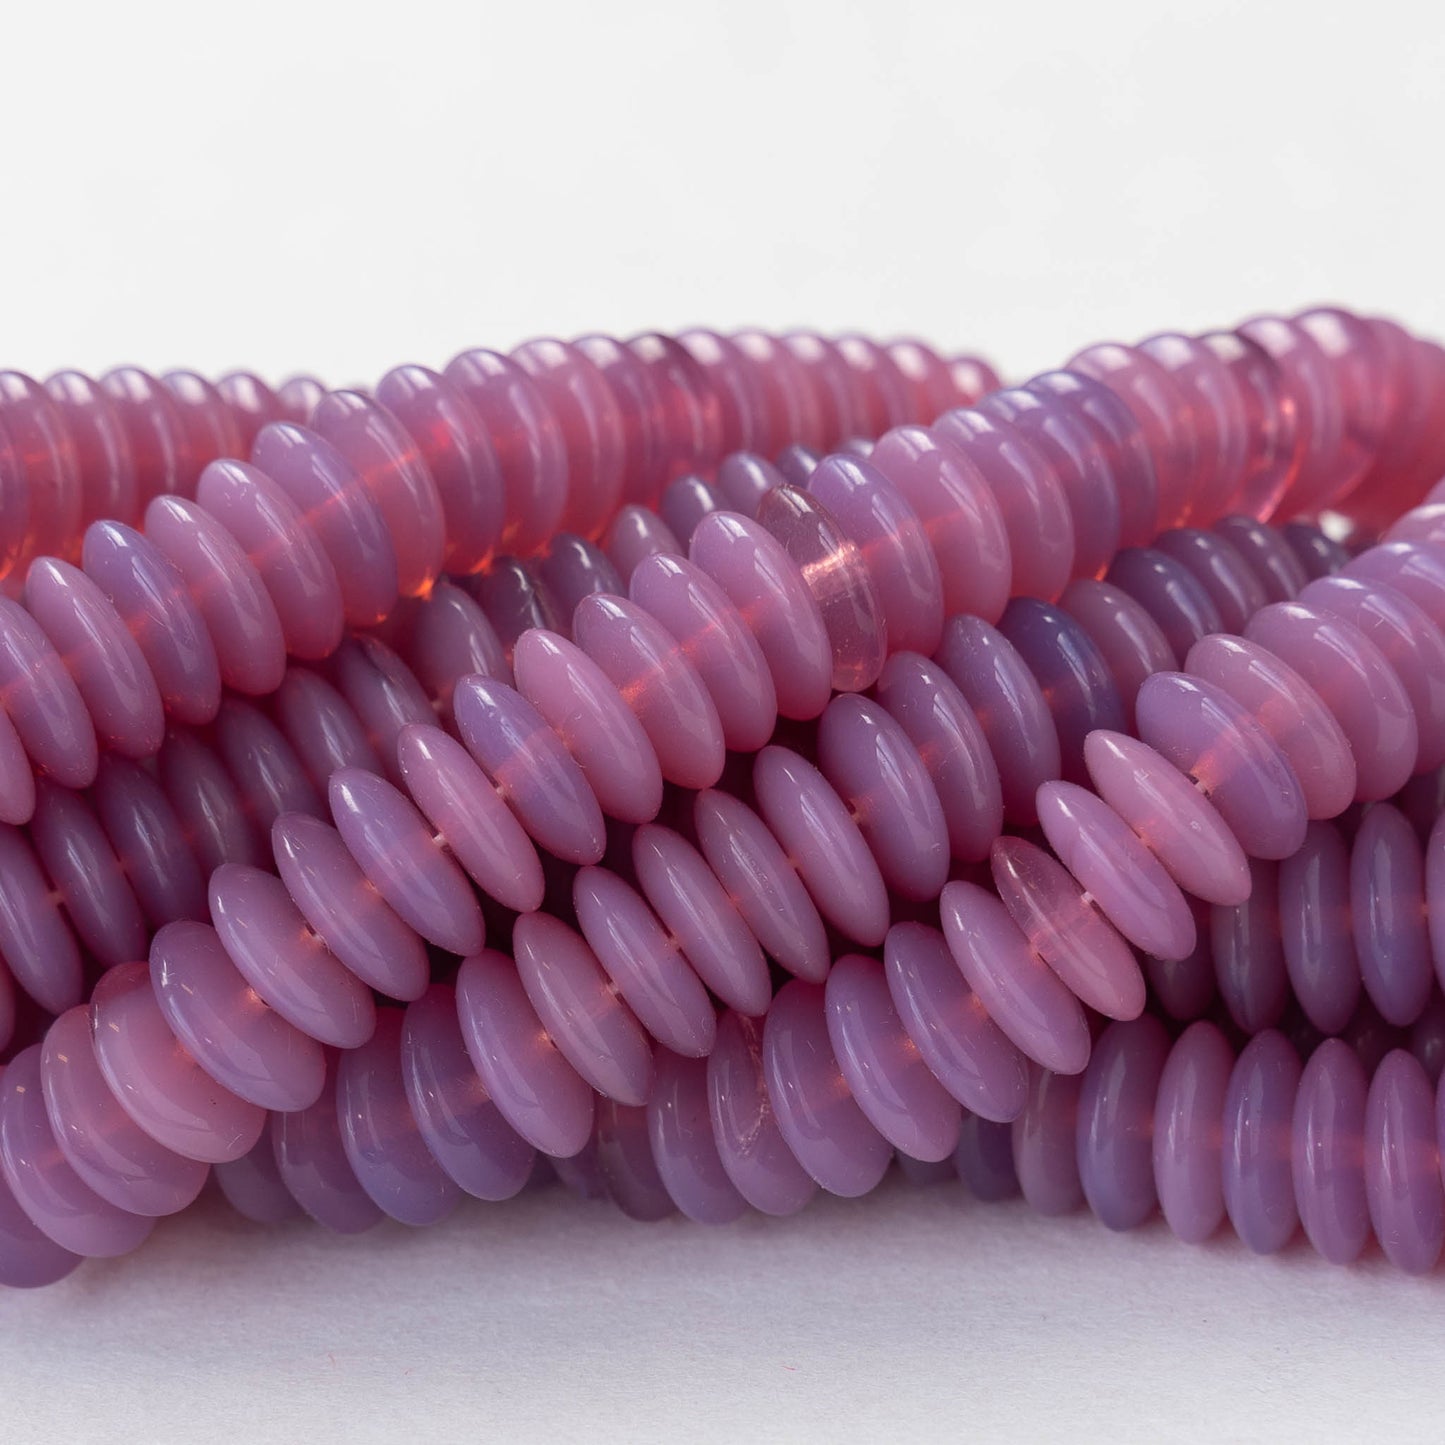 10mm Glass Rondelle Beads - Pink Opaline - 30 Beads